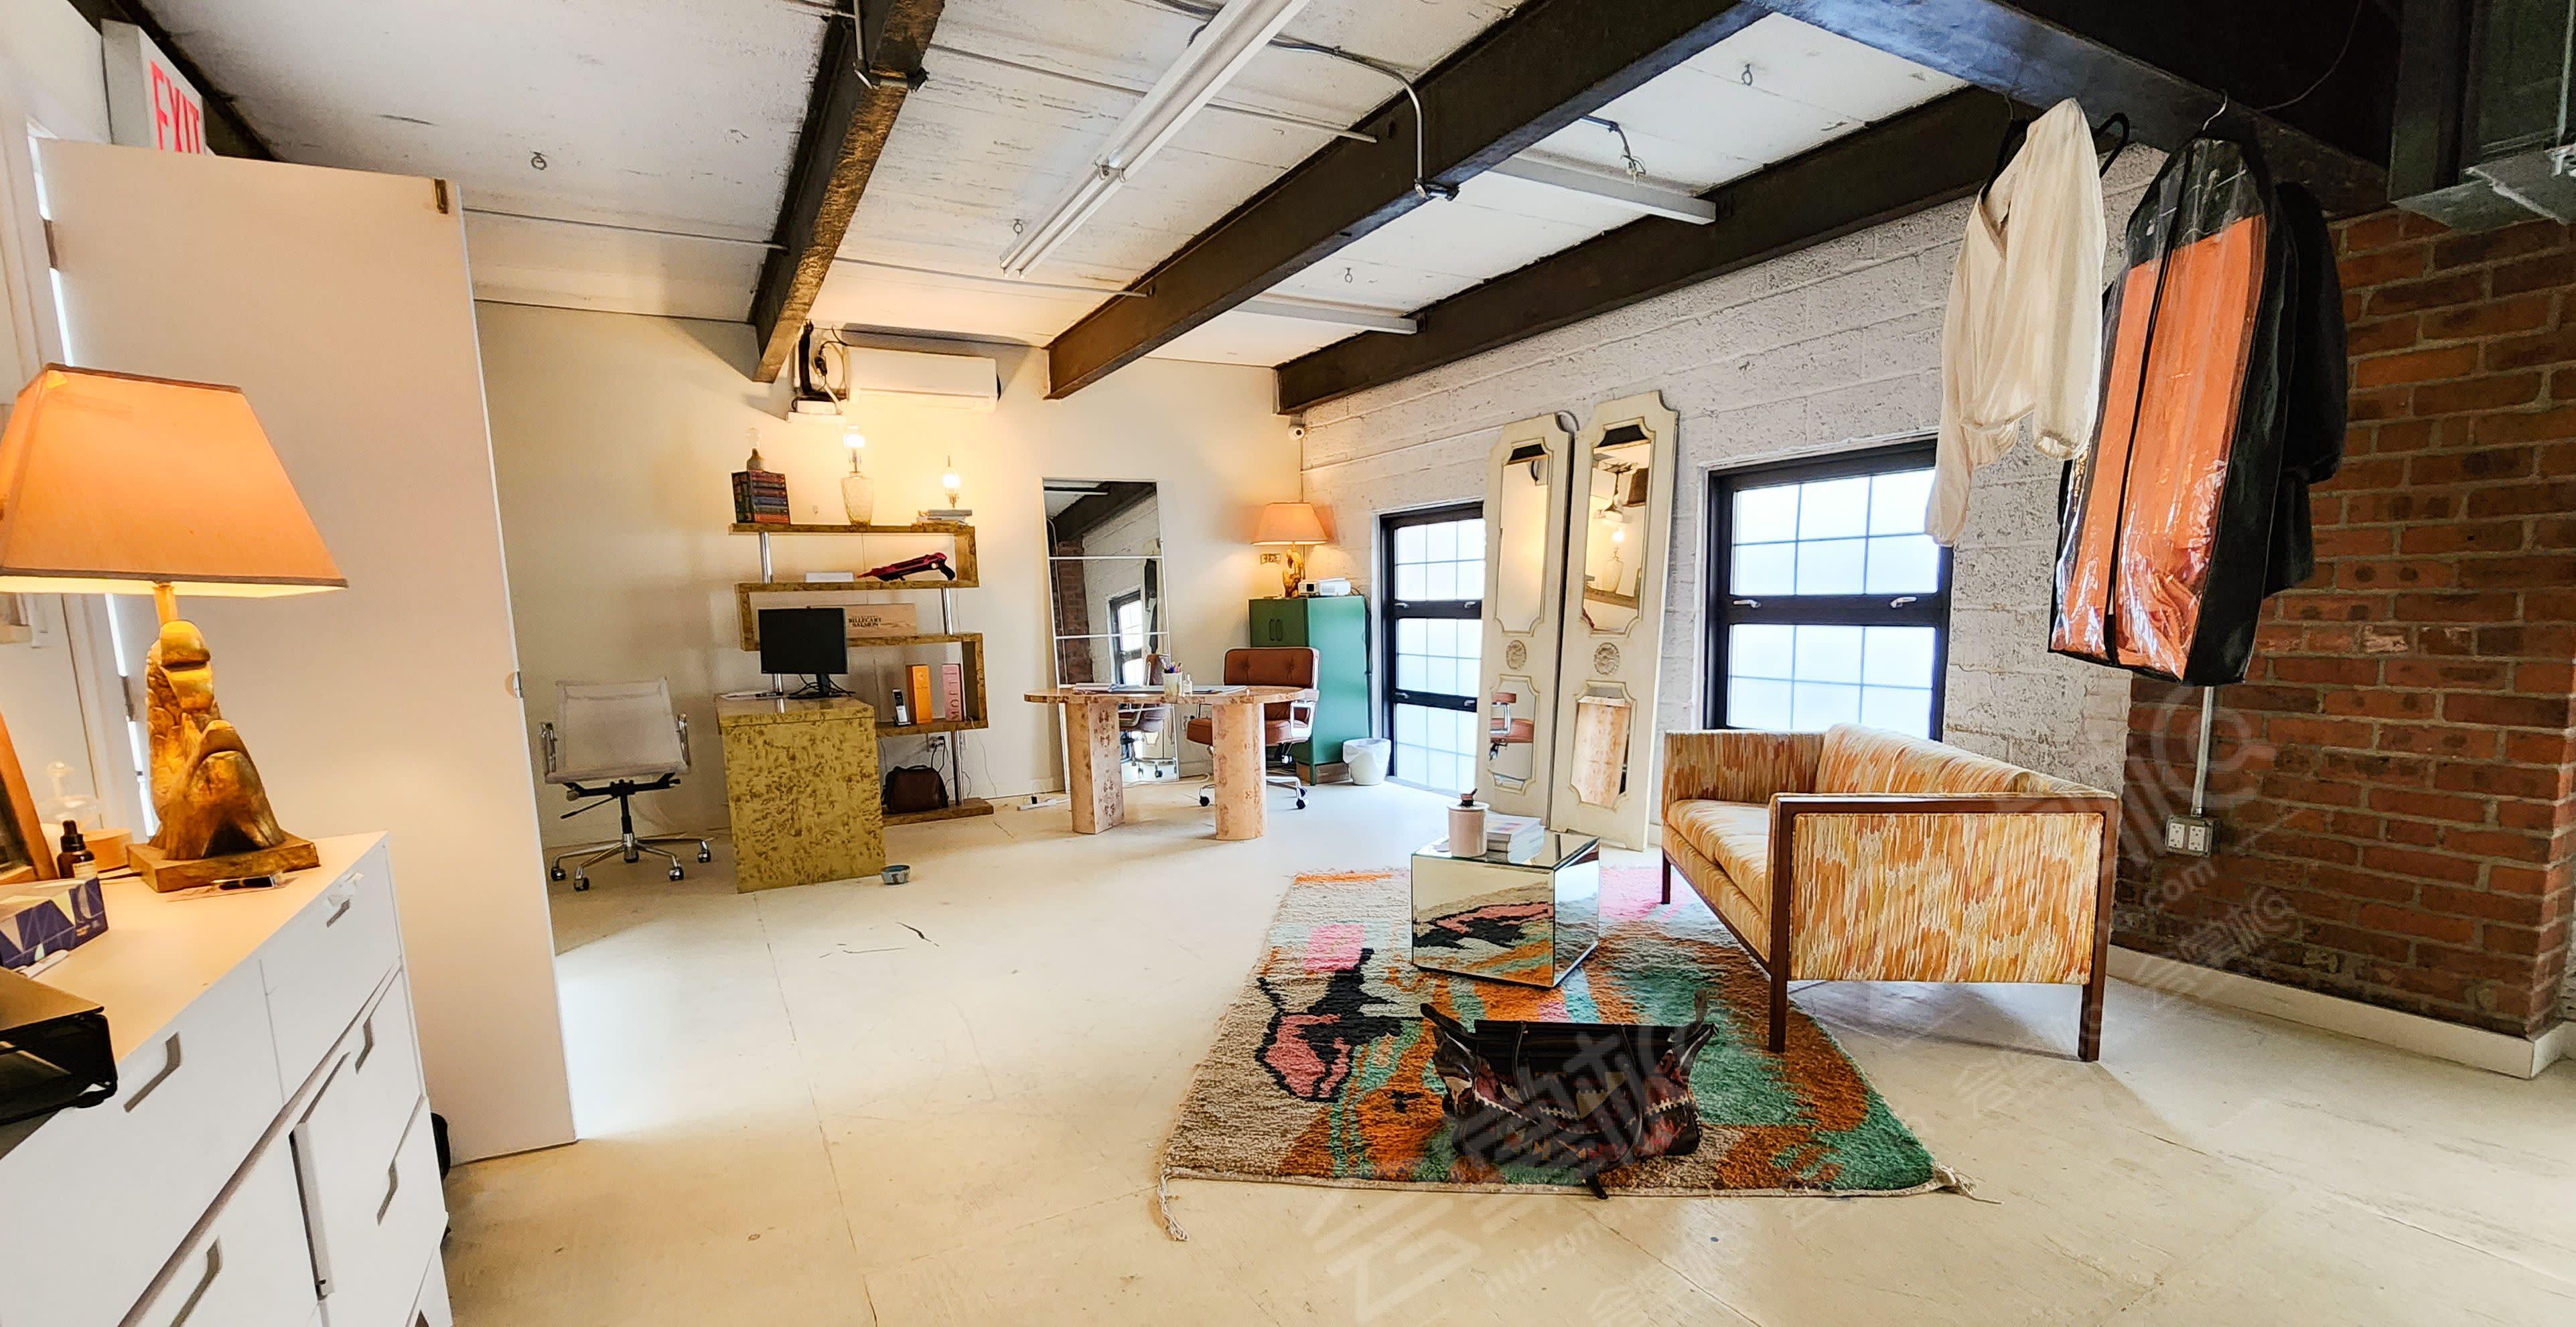 Williamsburg - 3000sq ft 16 ft Ceilings -4 Skylights Sun Drenched Industrial Creative Film/Photo/Event Space